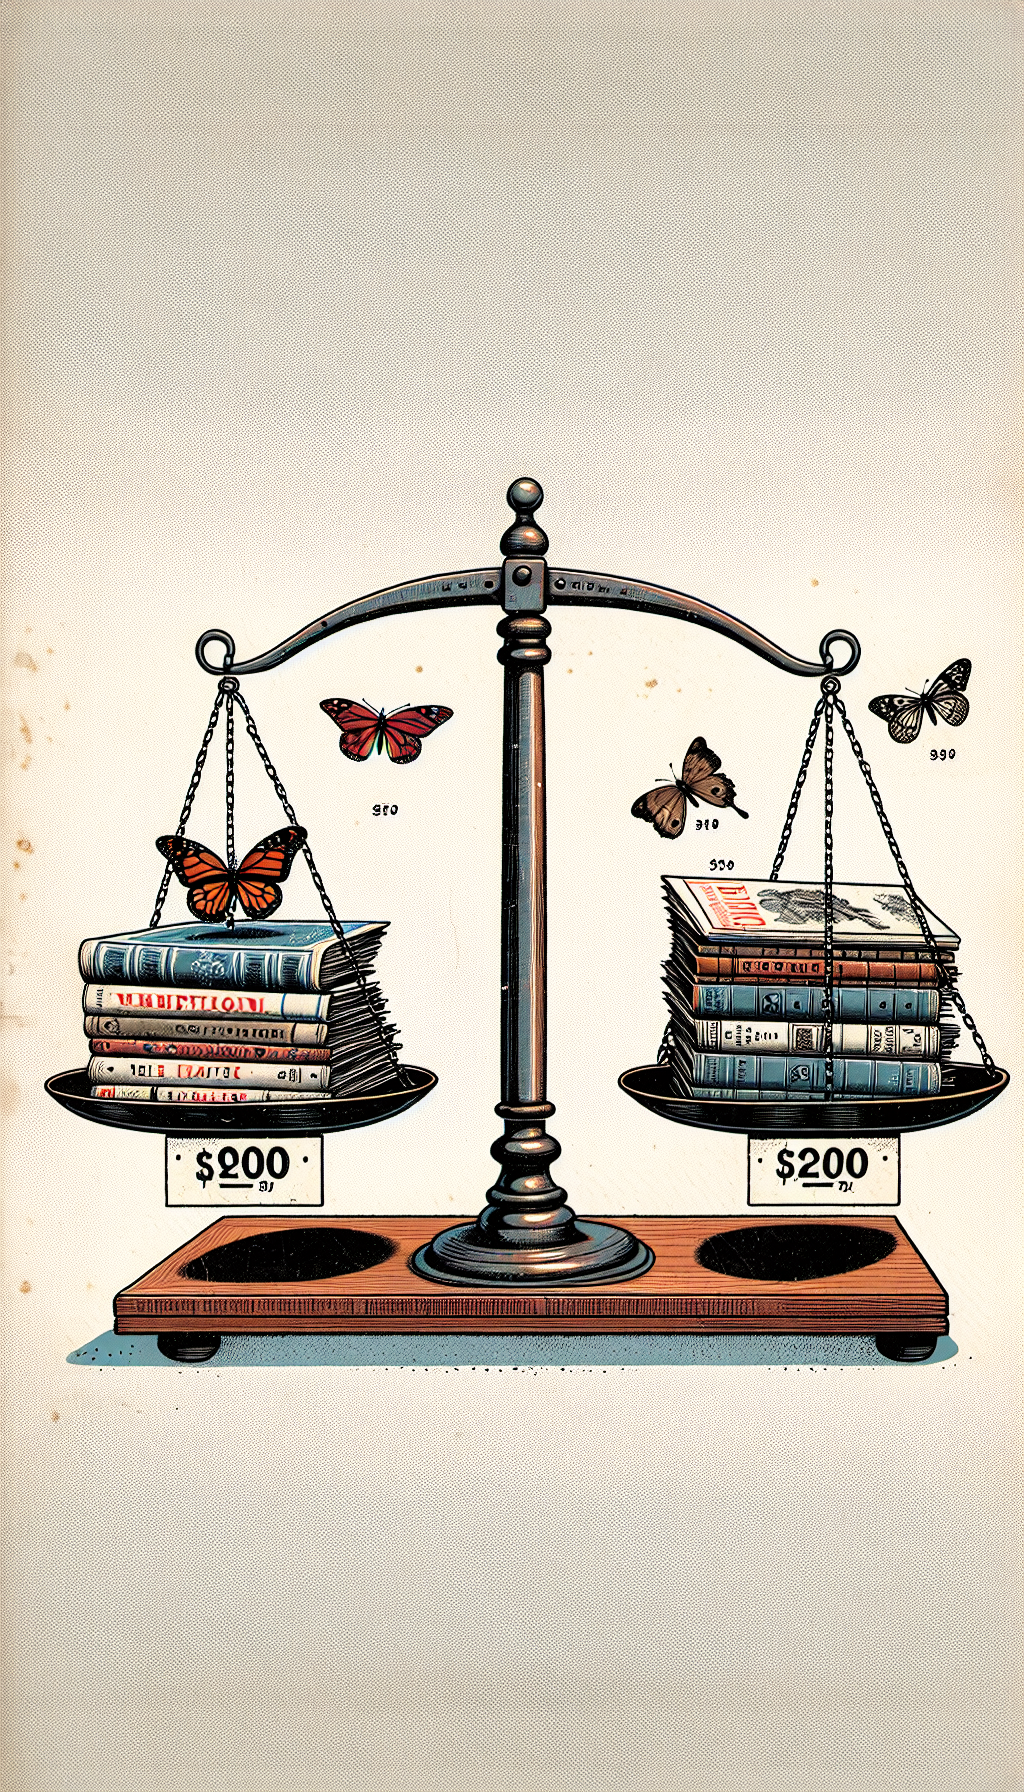 An illustration delicately balancing pristine and well-worn copies of old Playboy magazines at opposite ends of a vintage scale, with rare issue butterflies fluttering above the more valuable side, while less rare copies feature price tags with dwindling numbers, vividly visualizing the weight of rarity and condition in determining their respective values.